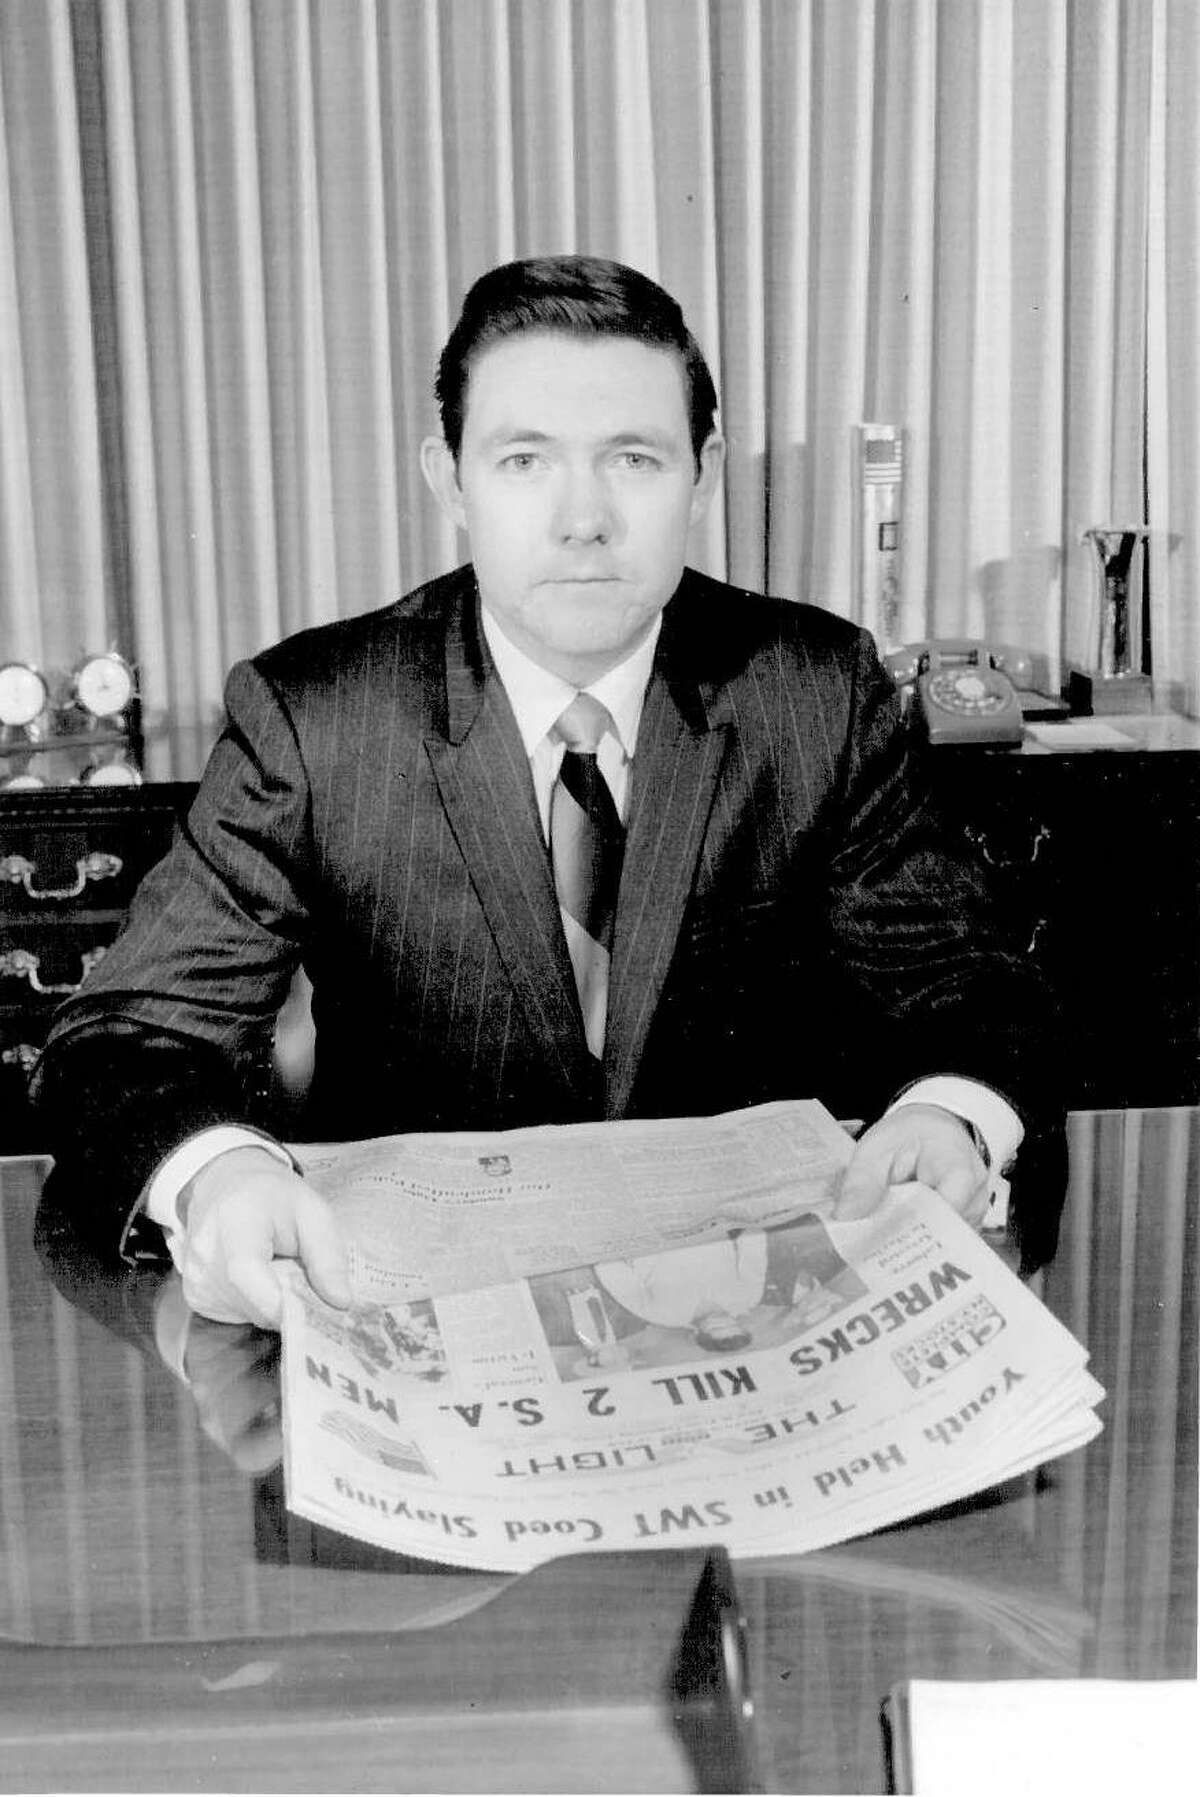 Frank A. Bennack Jr. photographed in 1970 at the San Antonio Light. After serving as publisher of the daily newspaper, Bennack moved to Hearst Corp. in New York and soon became its CEO.